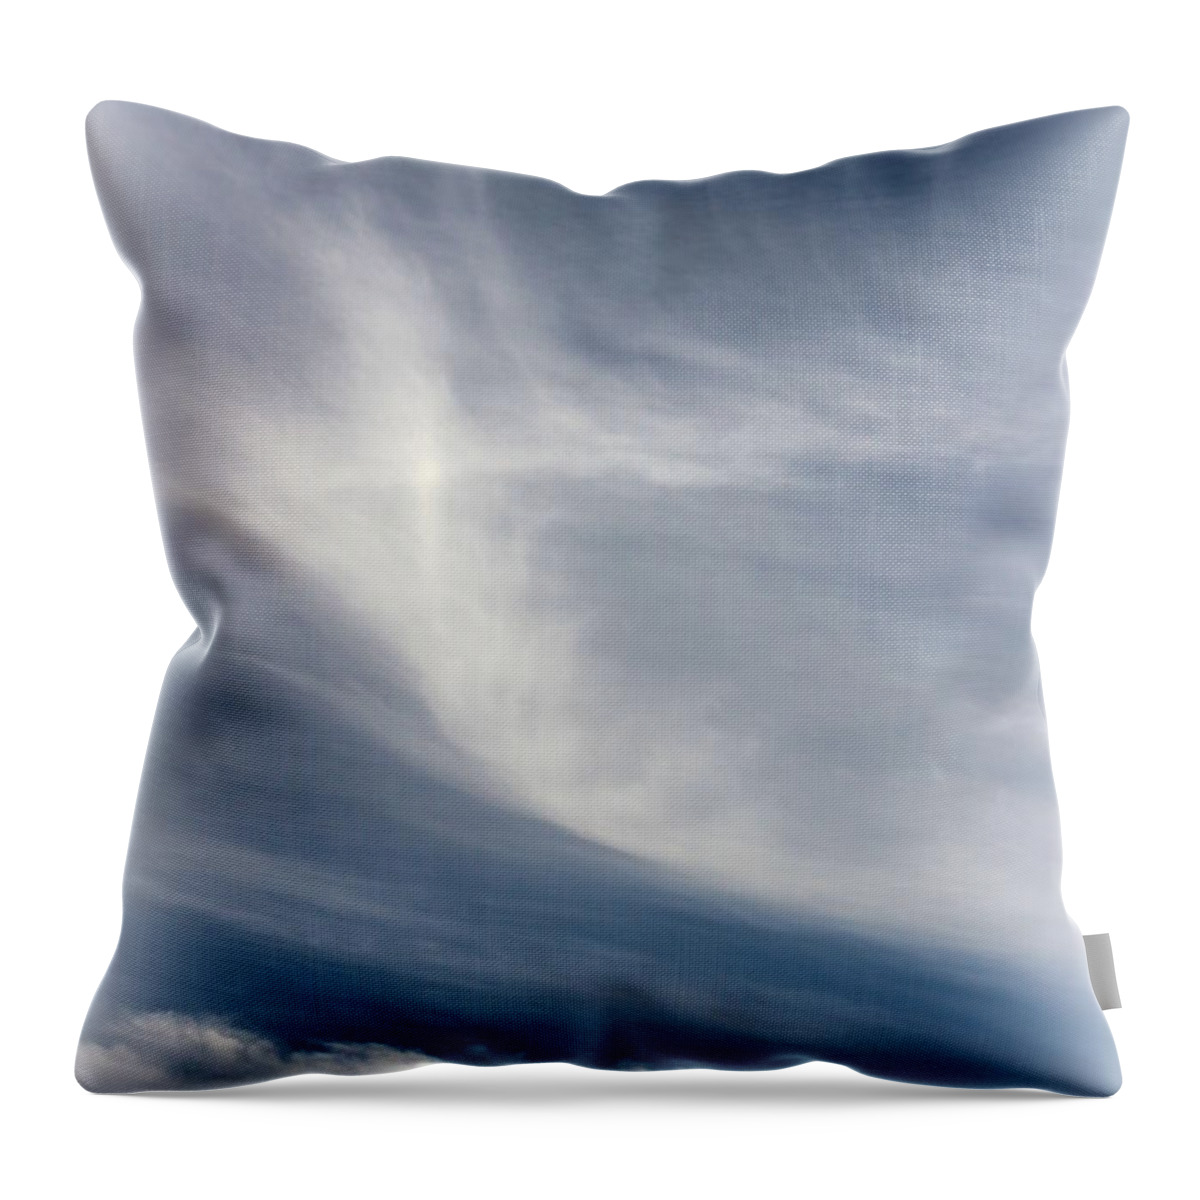 Heavenly Throw Pillow featuring the photograph Heavenly by Beth Vincent